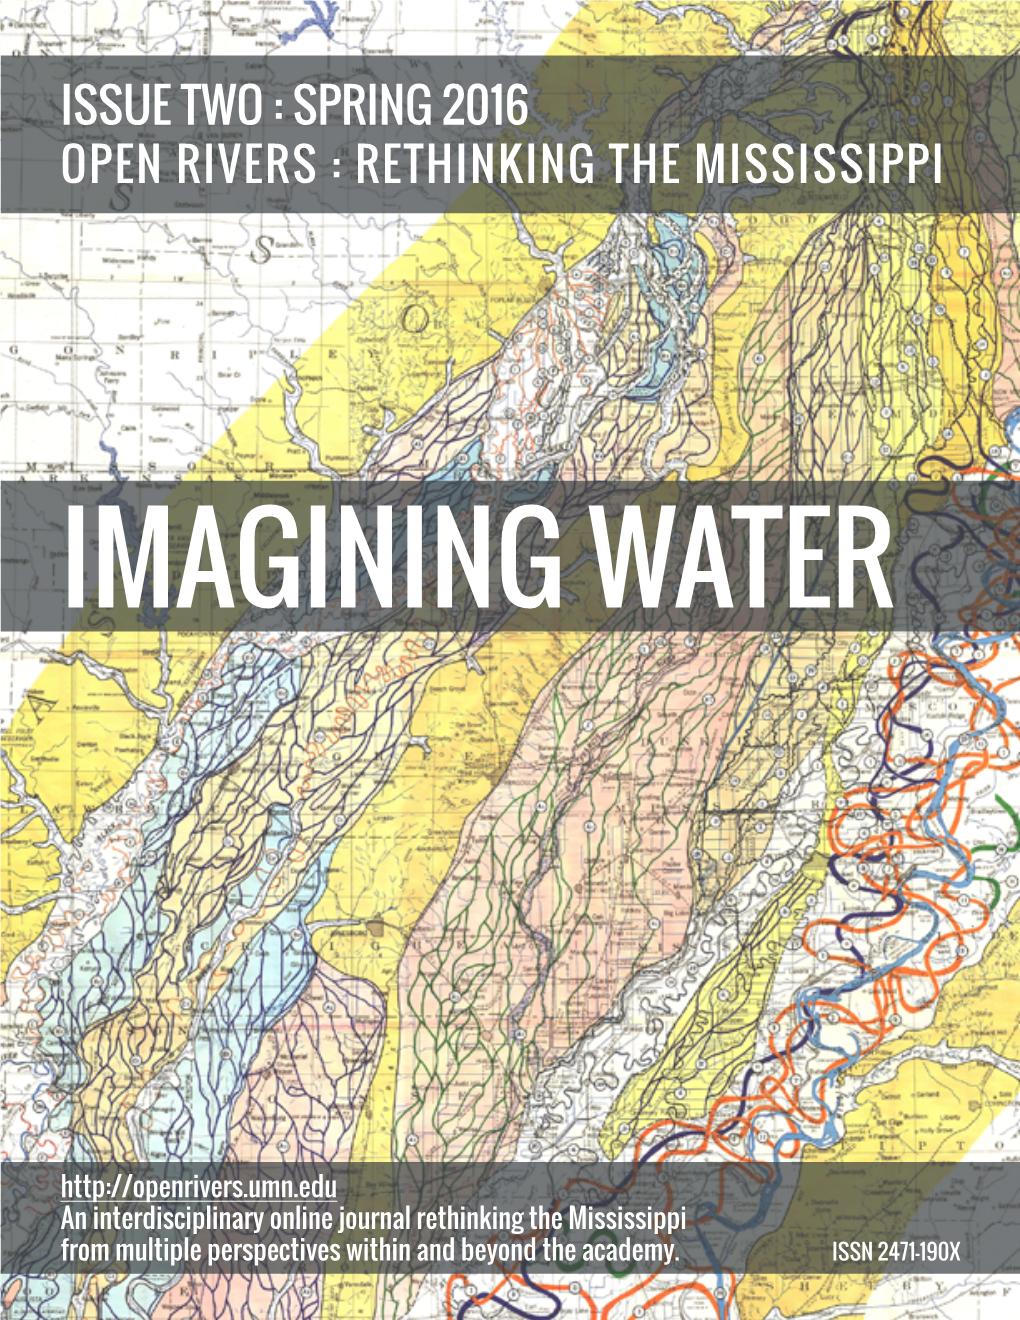 Issue Two : Spring 2016 Open Rivers : Rethinking the Mississippi